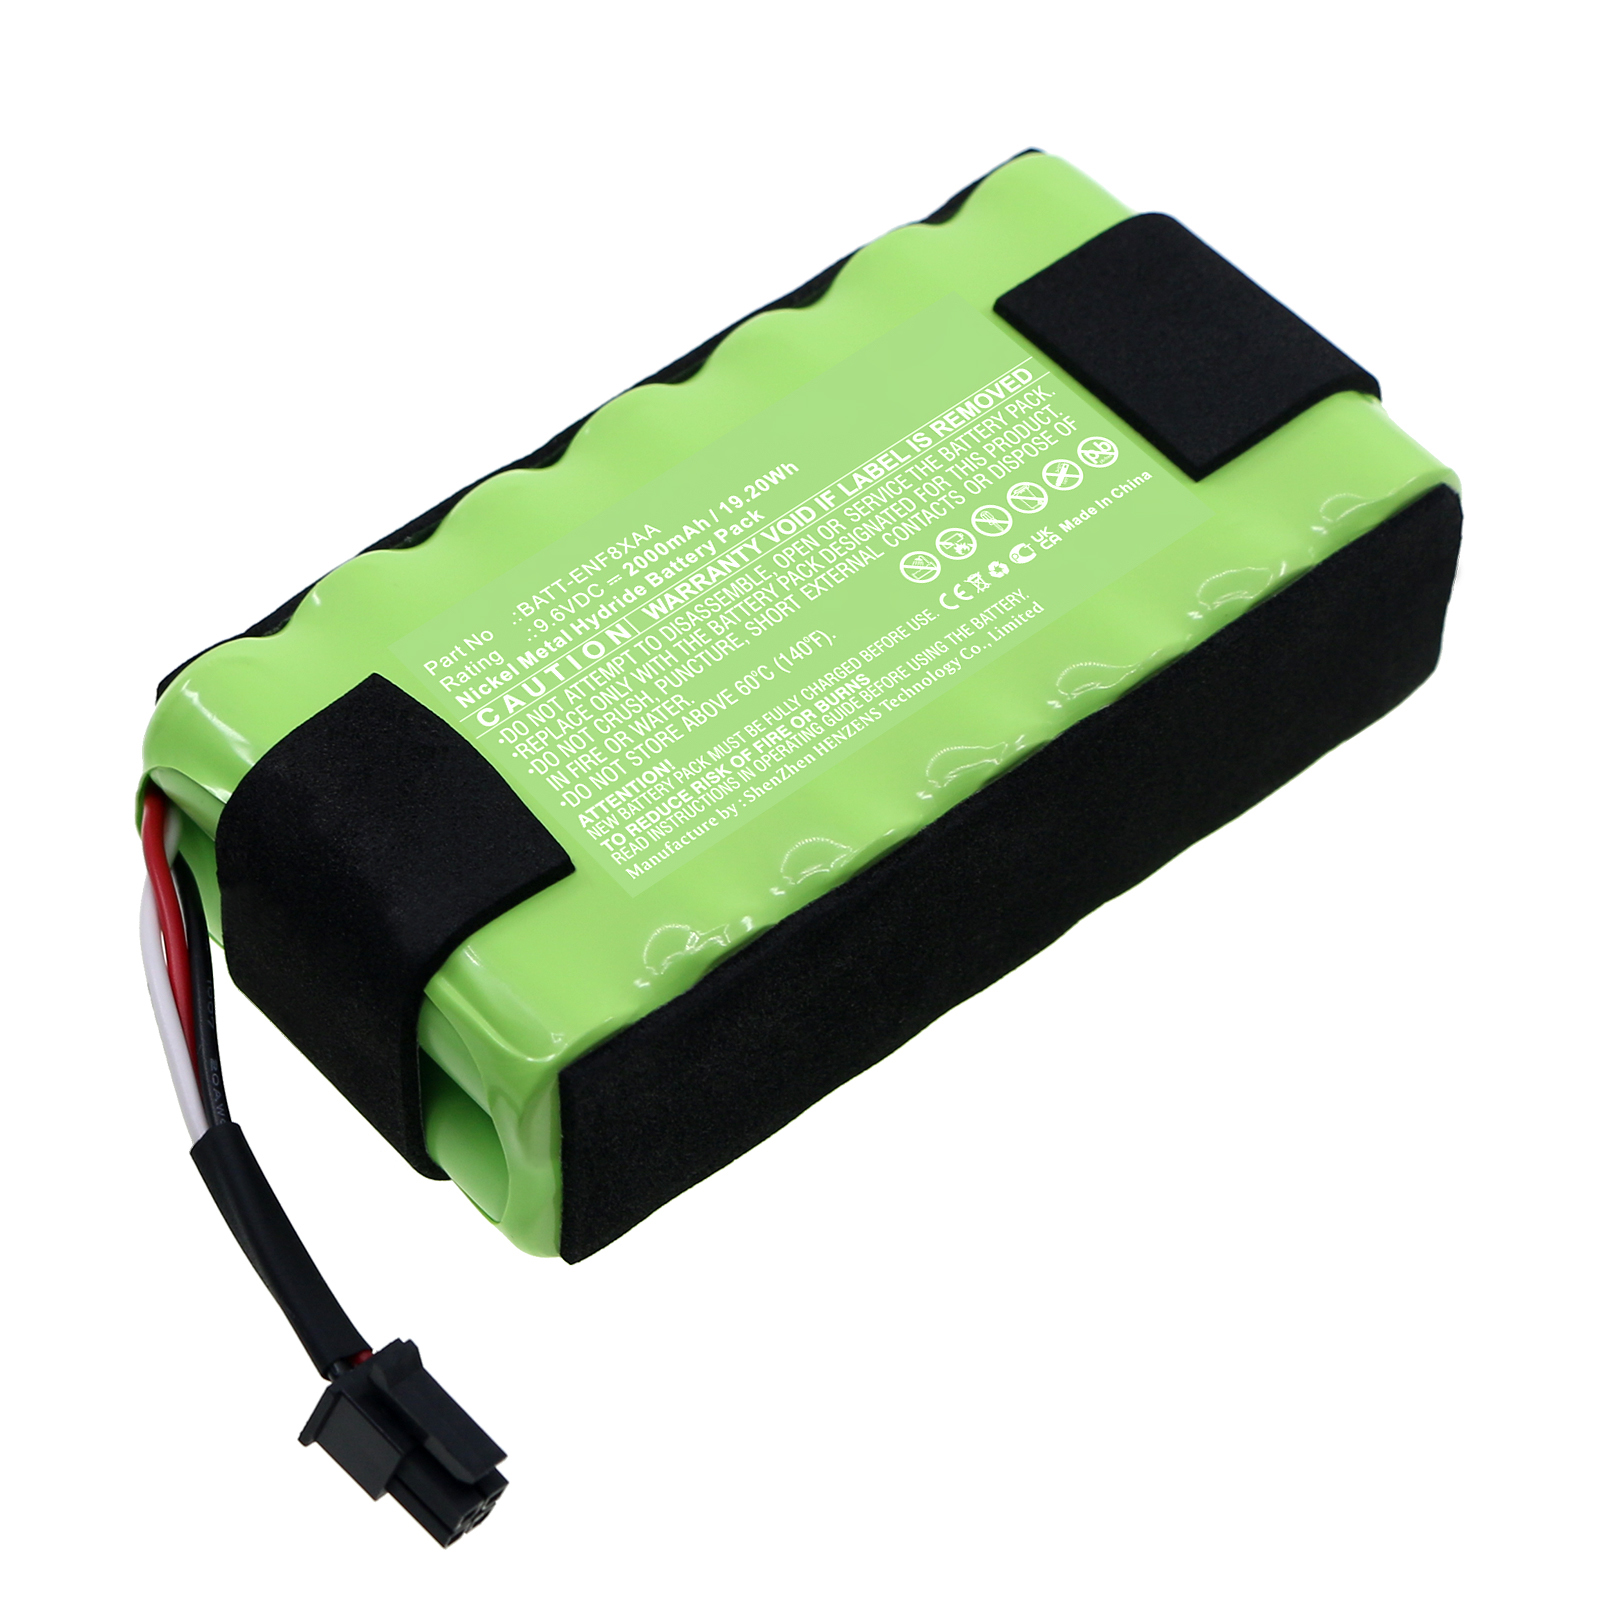 Synergy Digital Medical Battery, Compatible with Stryker 250-070-602 Medical Battery (Ni-MH, 16.8V, 2000mAh)